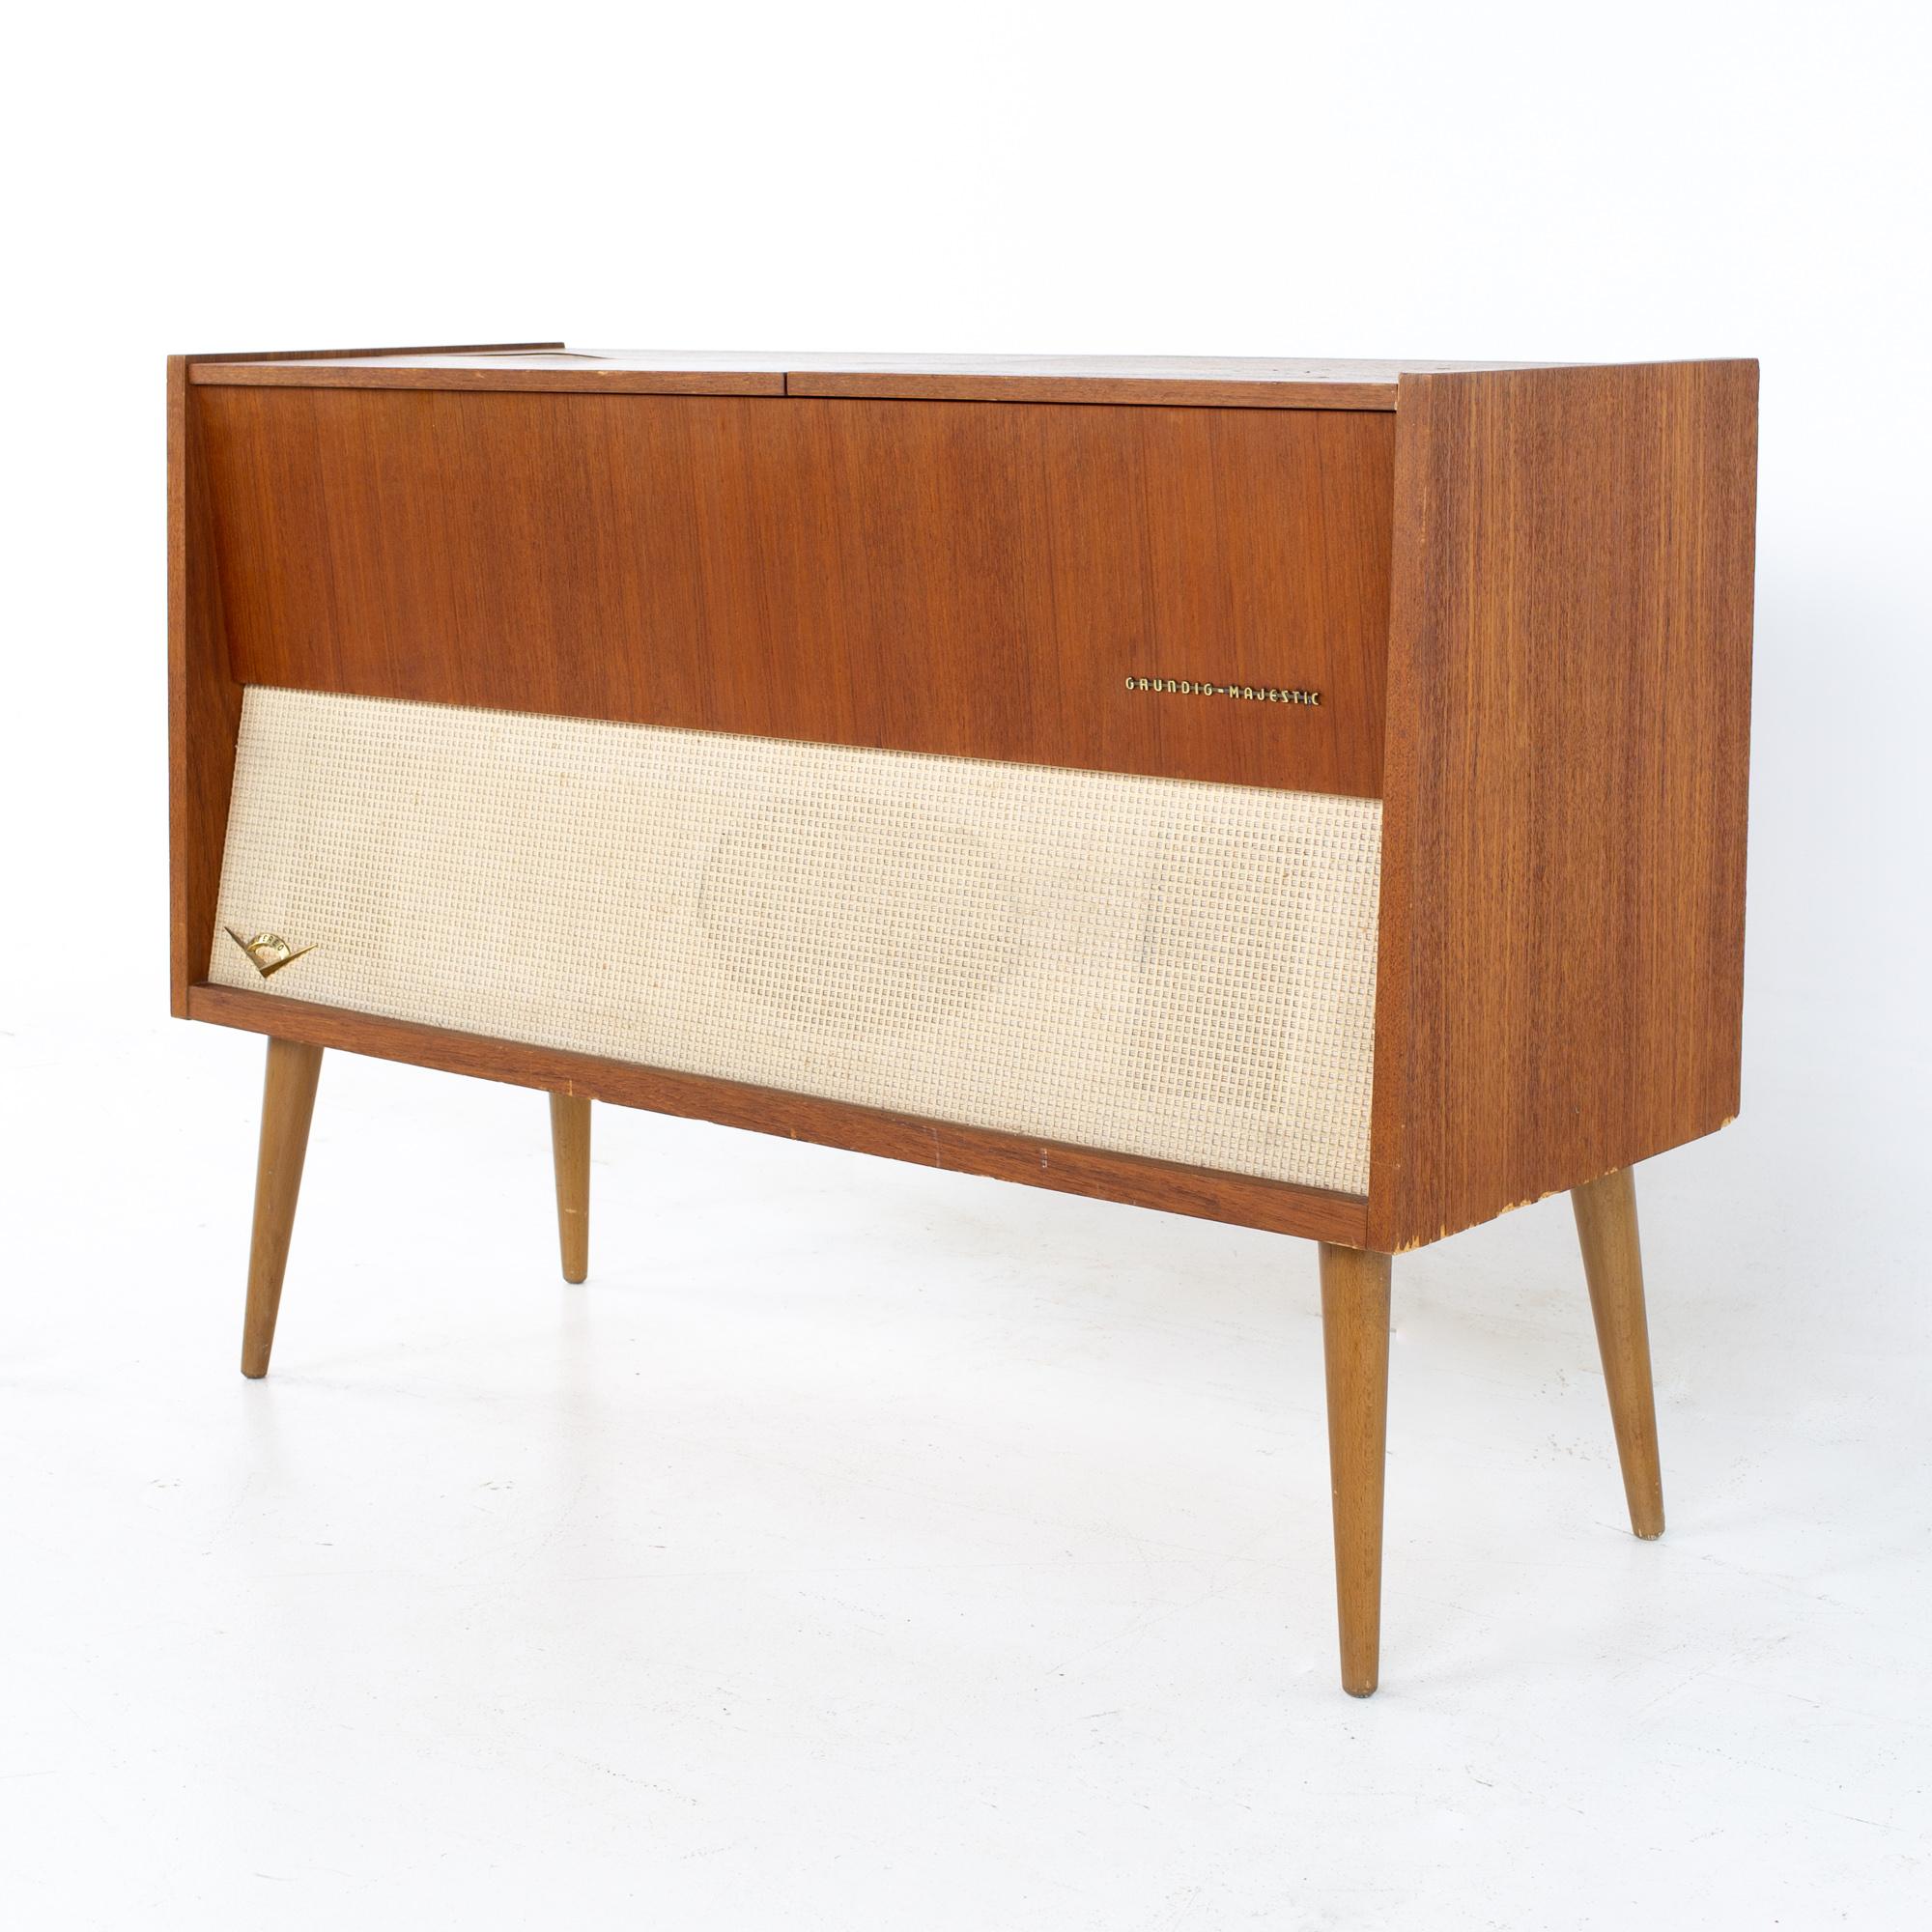 Grundig majestic mid century stereo record console.
Stereo measures: 40 wide x 15 deep x 28.5 inches high

All pieces of furniture can be had in what we call restored vintage condition. That means the piece is restored upon purchase so it’s free